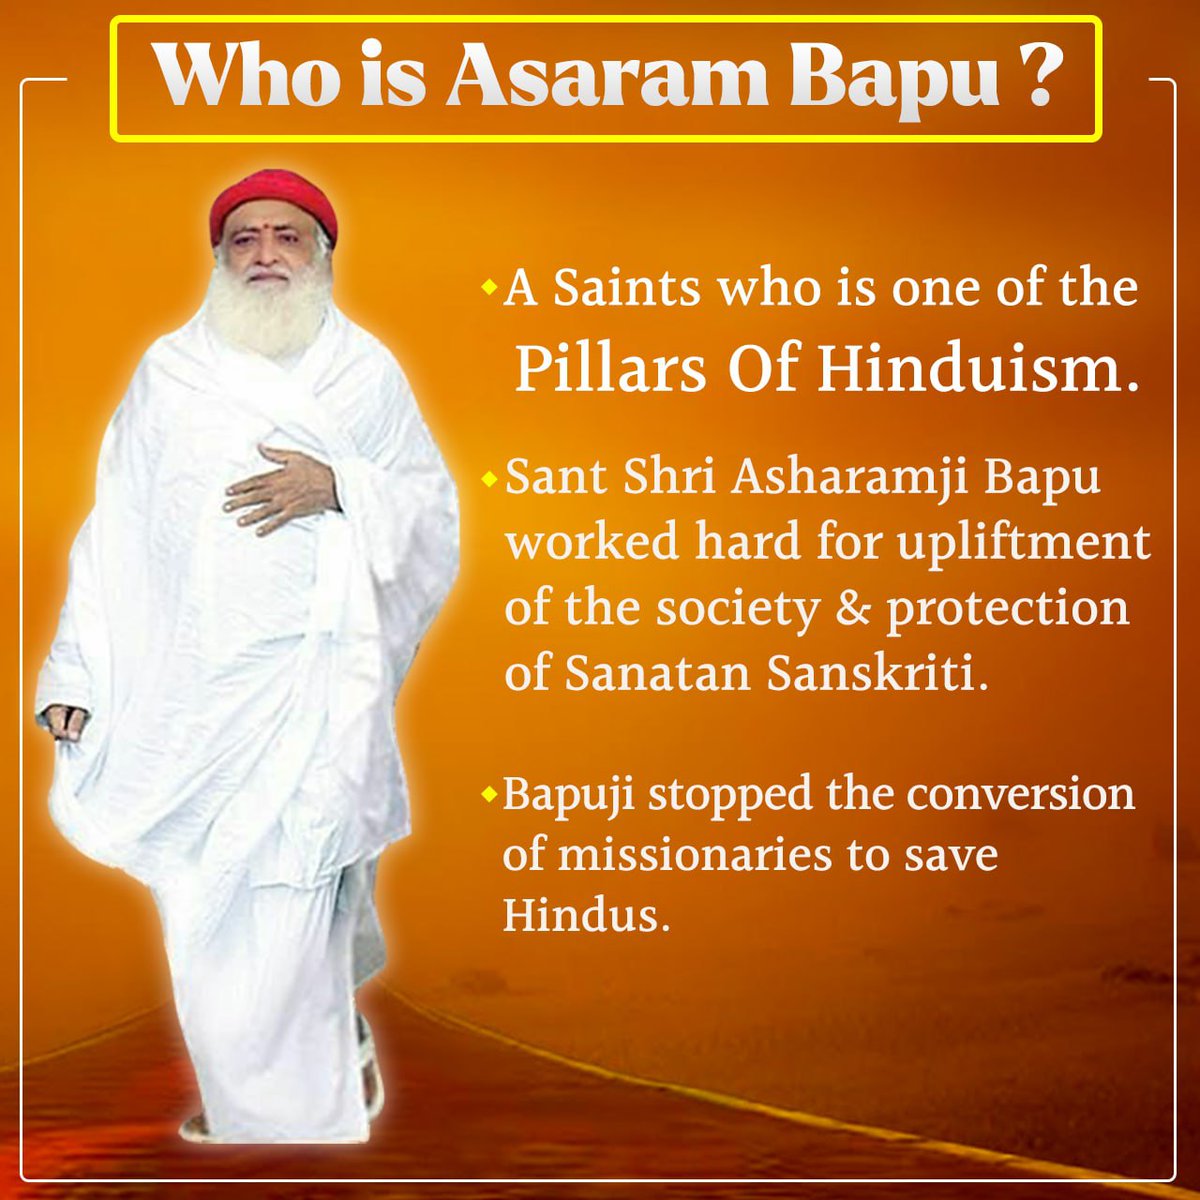 Do you know Who Is Asaram Bapu??
Sant Shri Asharamji Bapu is a Great Hindu Saint,a Spiritual revolutionist.
Since childhood He had the zeal to know the energy which runs the universe .At the age of 23 HE selfrealized and since then working for humanity.
Jeevan Jhanki
#LifeOfAYogi